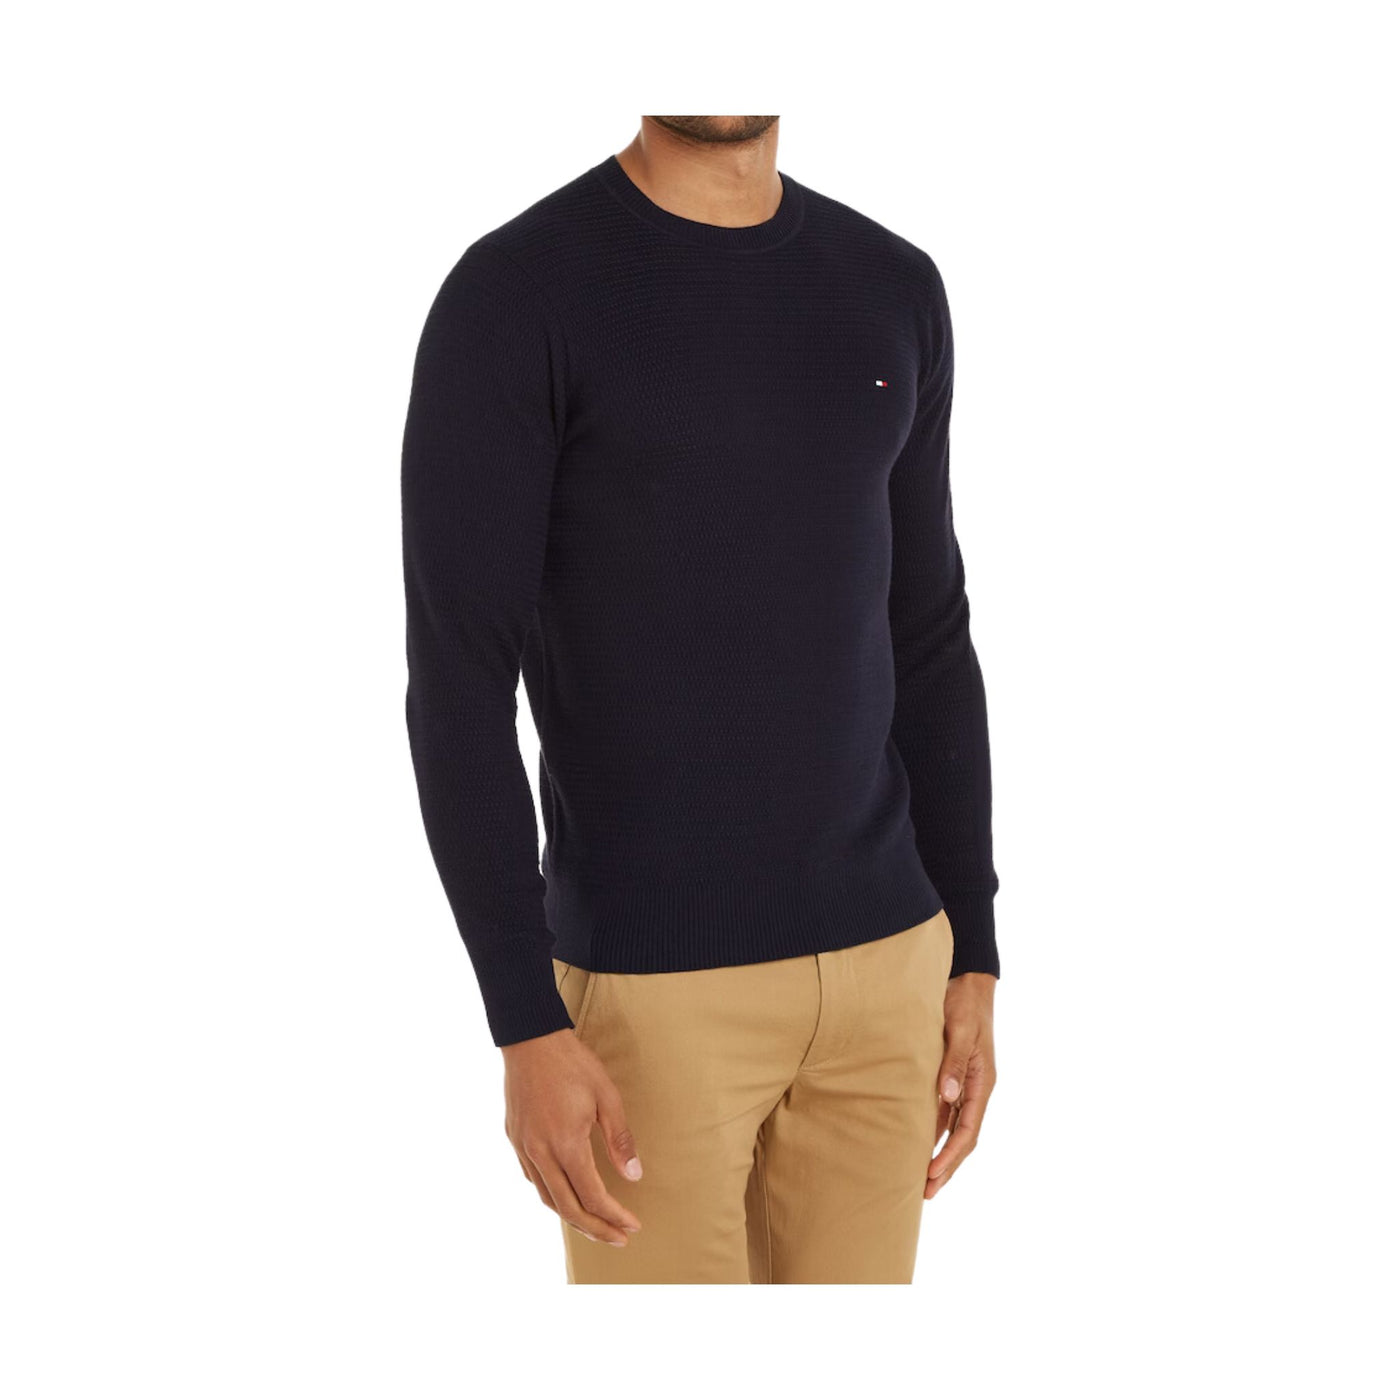 Solid color men's sweater with logo